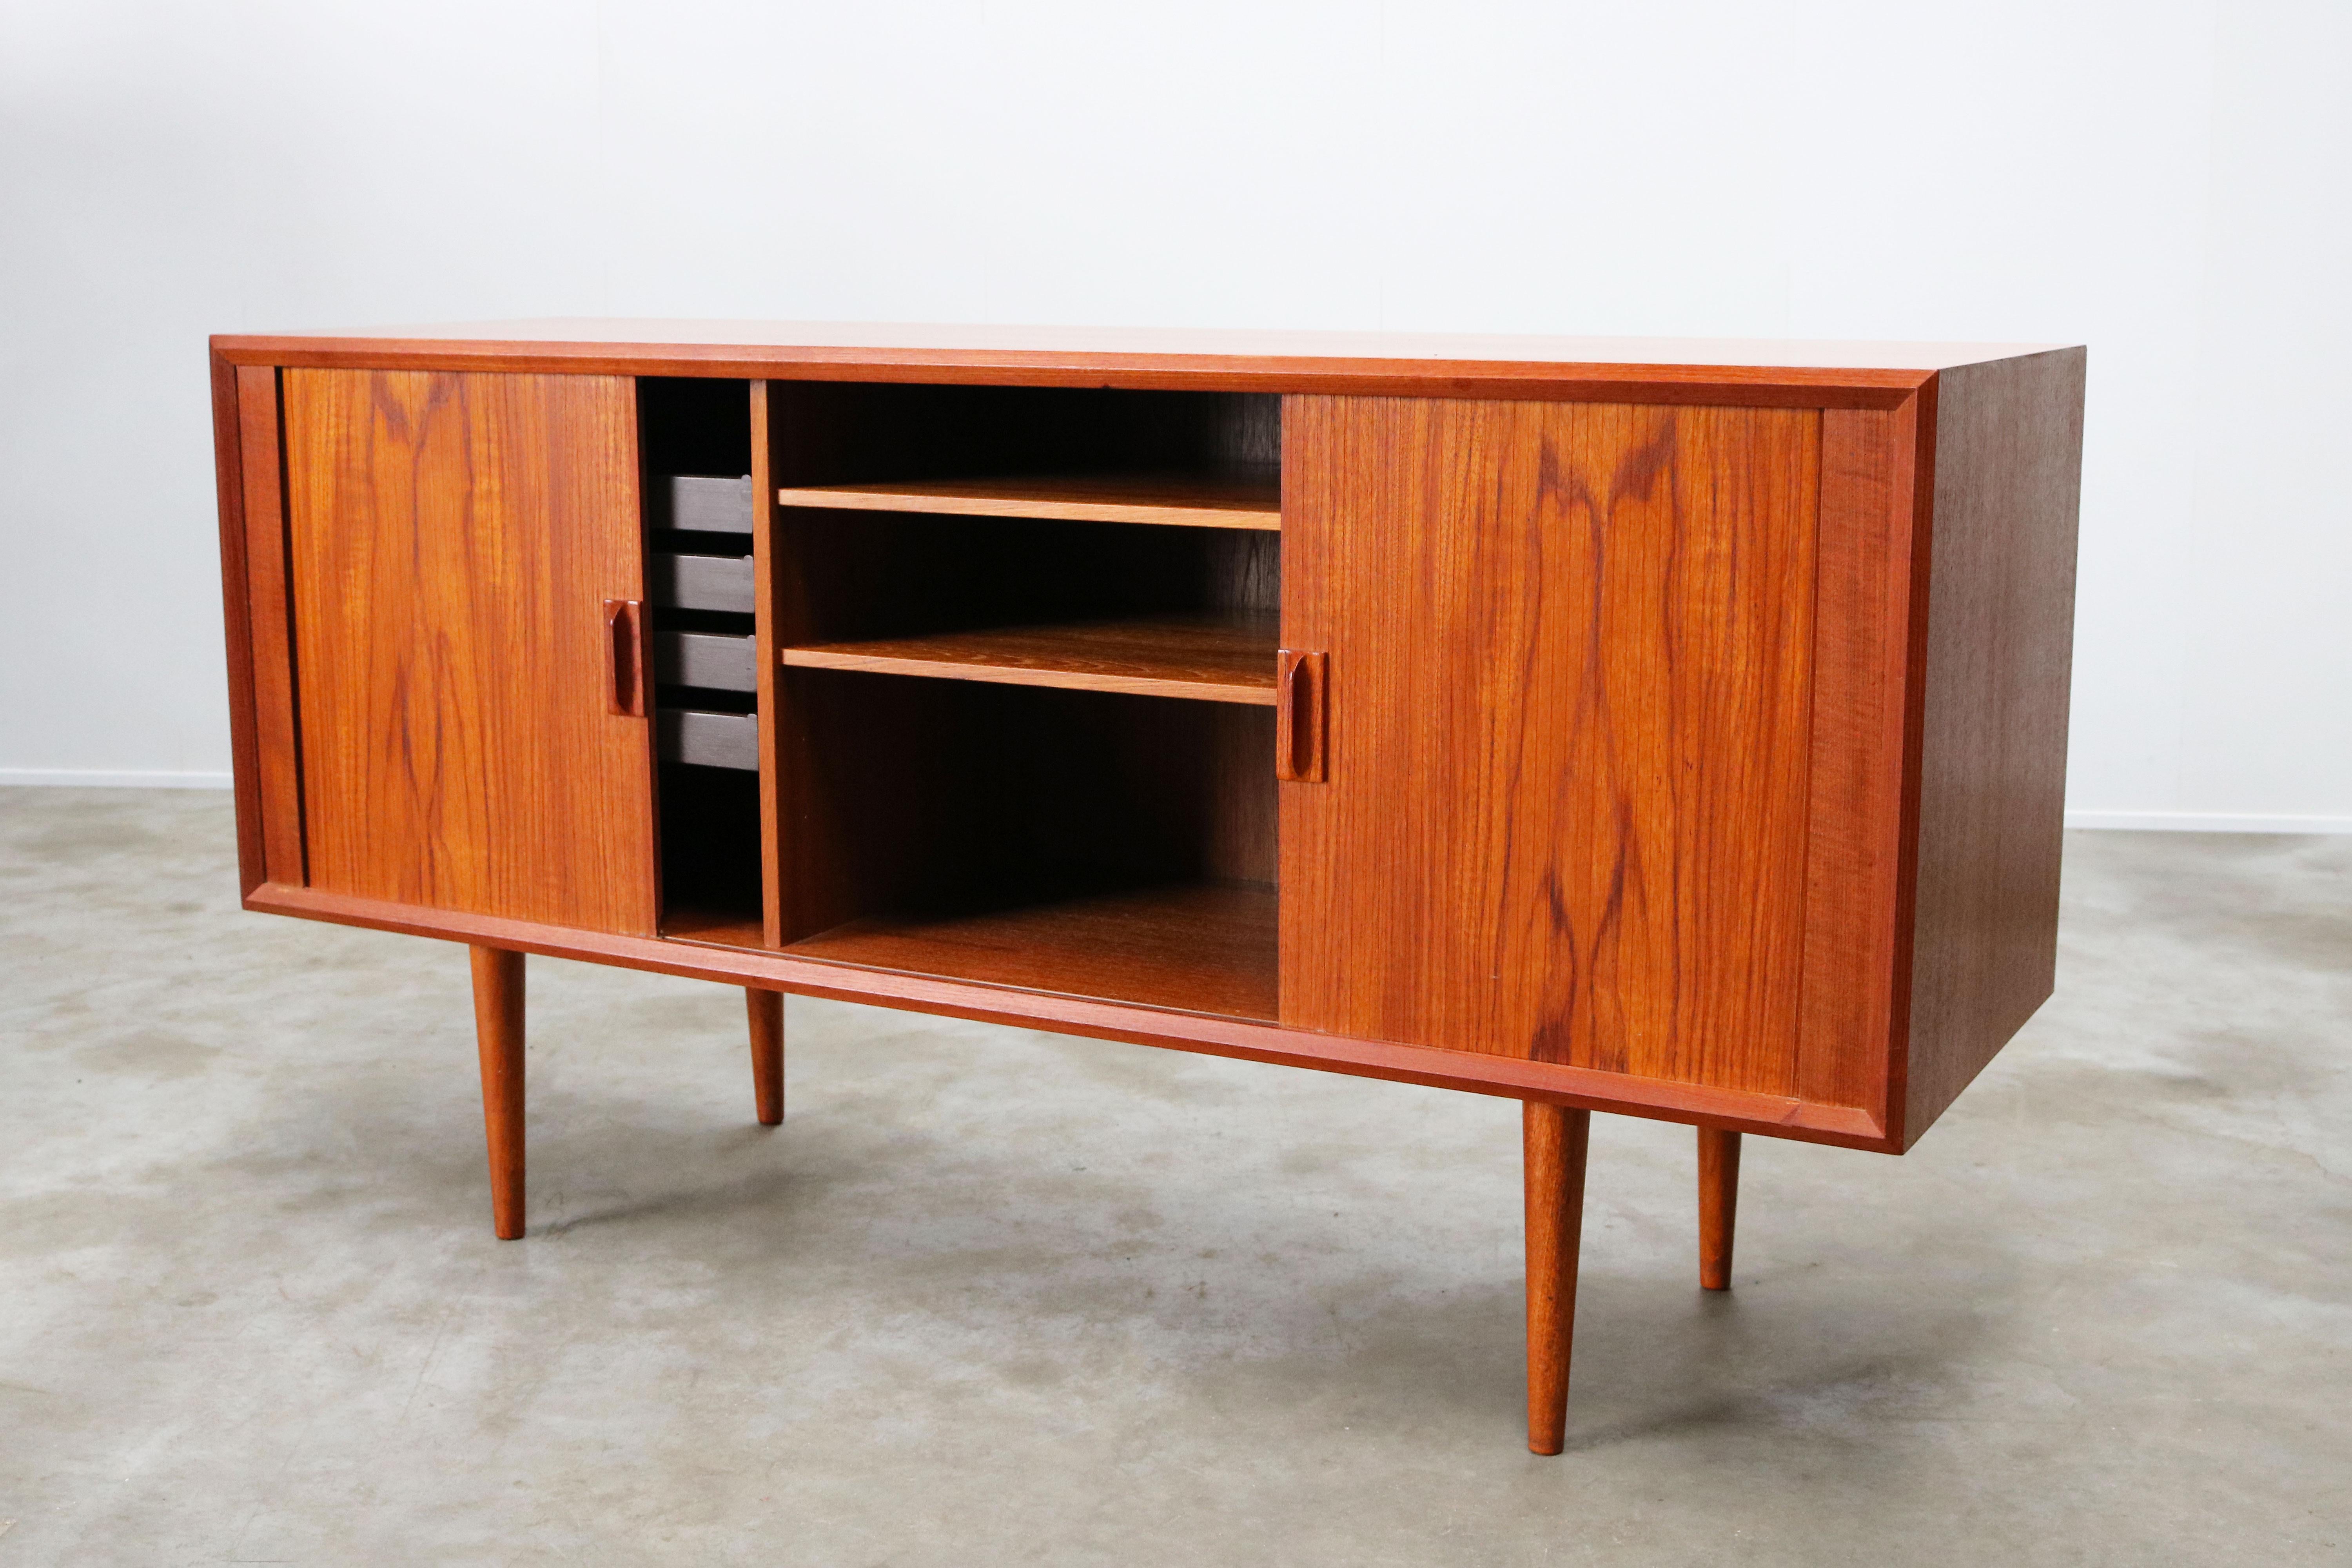 Small Rare Danish Sideboard / Credenza by Svend Aage Madsen for Faarup 1950 Teak 8